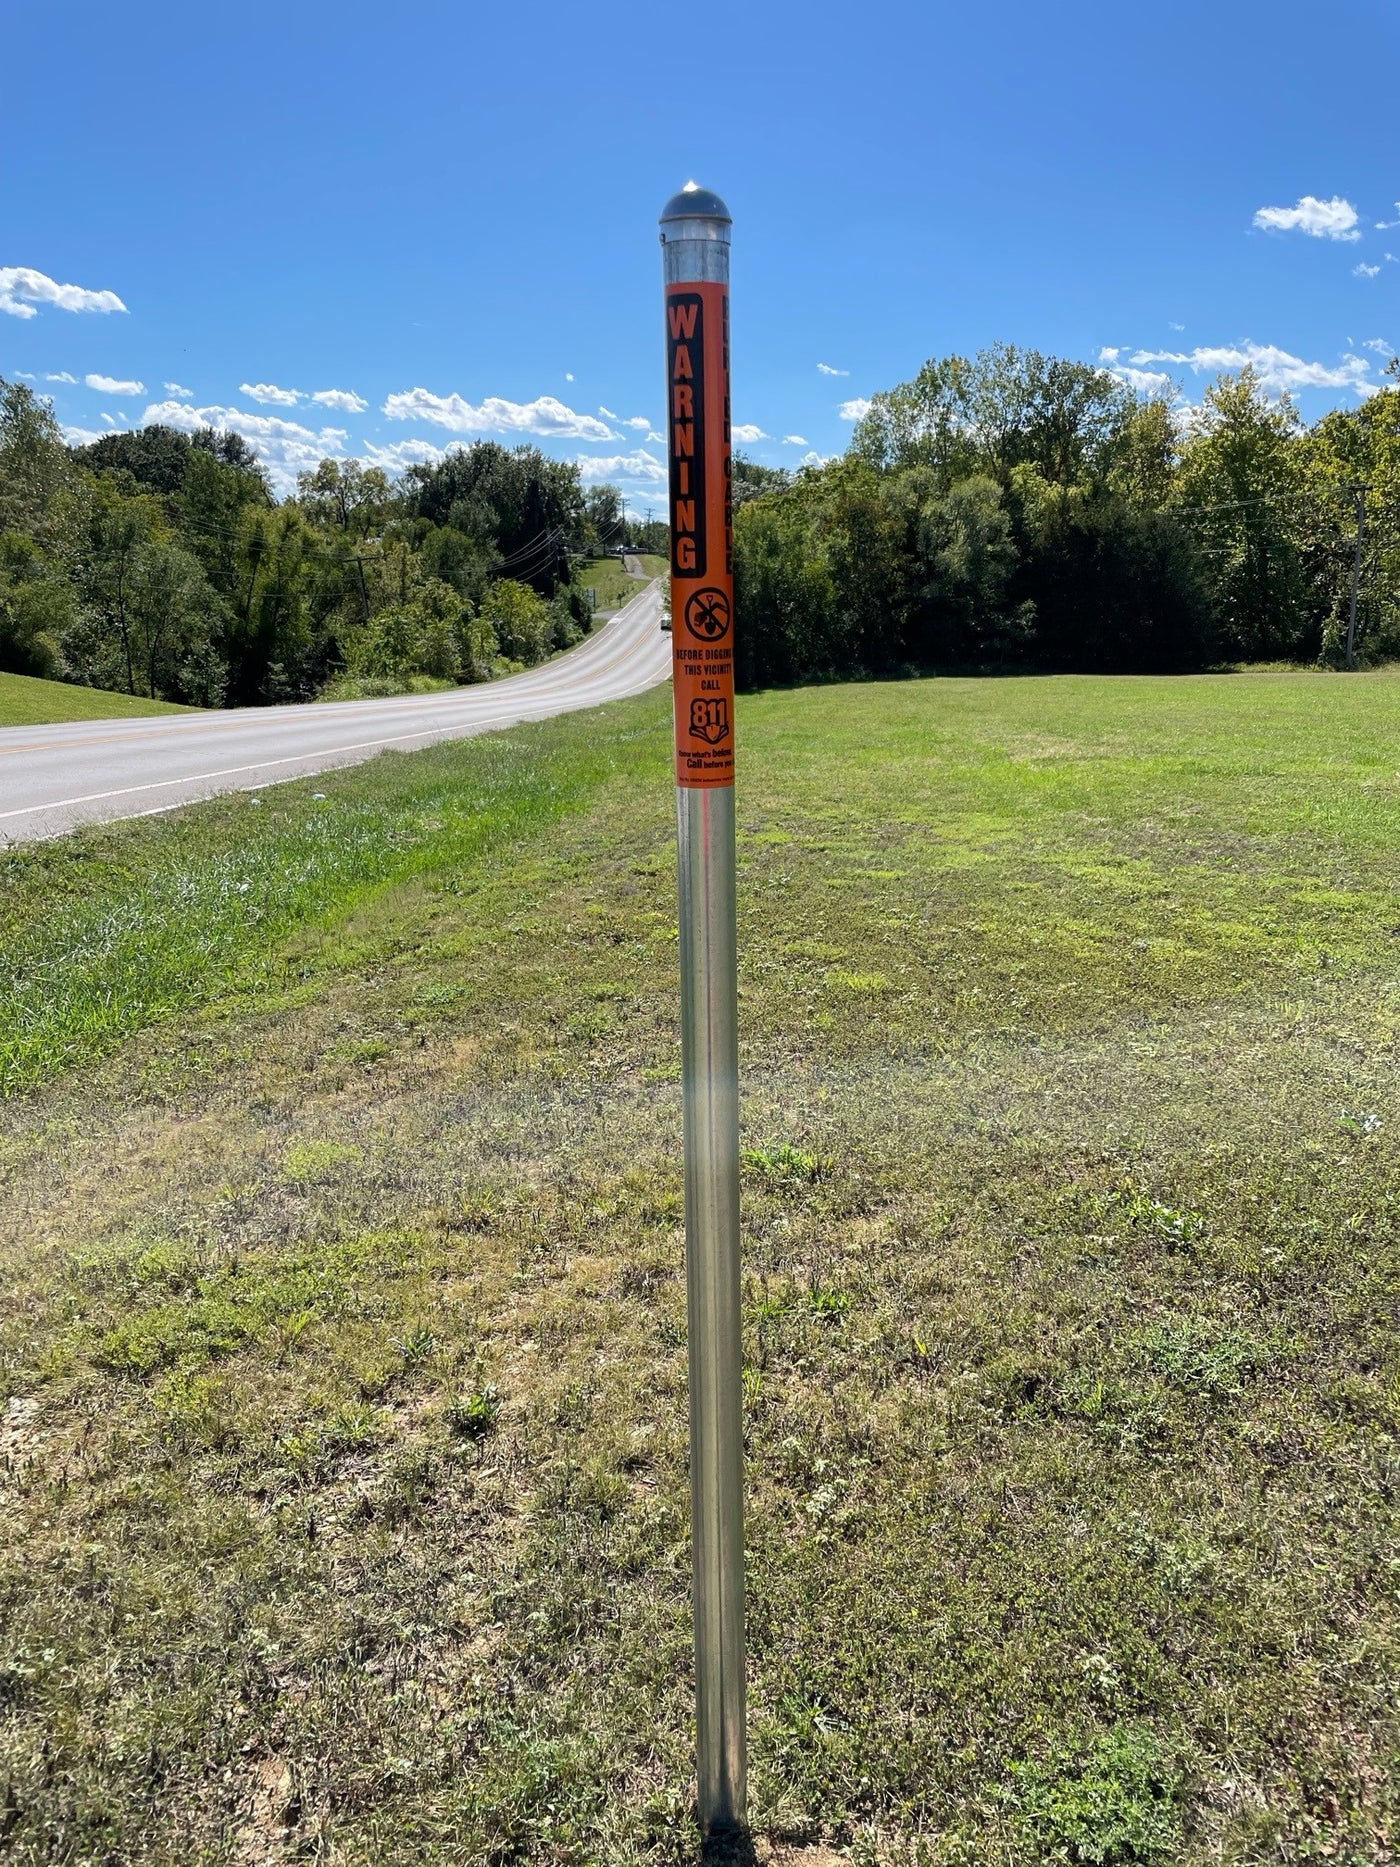 OP6 6' Steel Marker Post with Reflective Decal, 7.5lbs